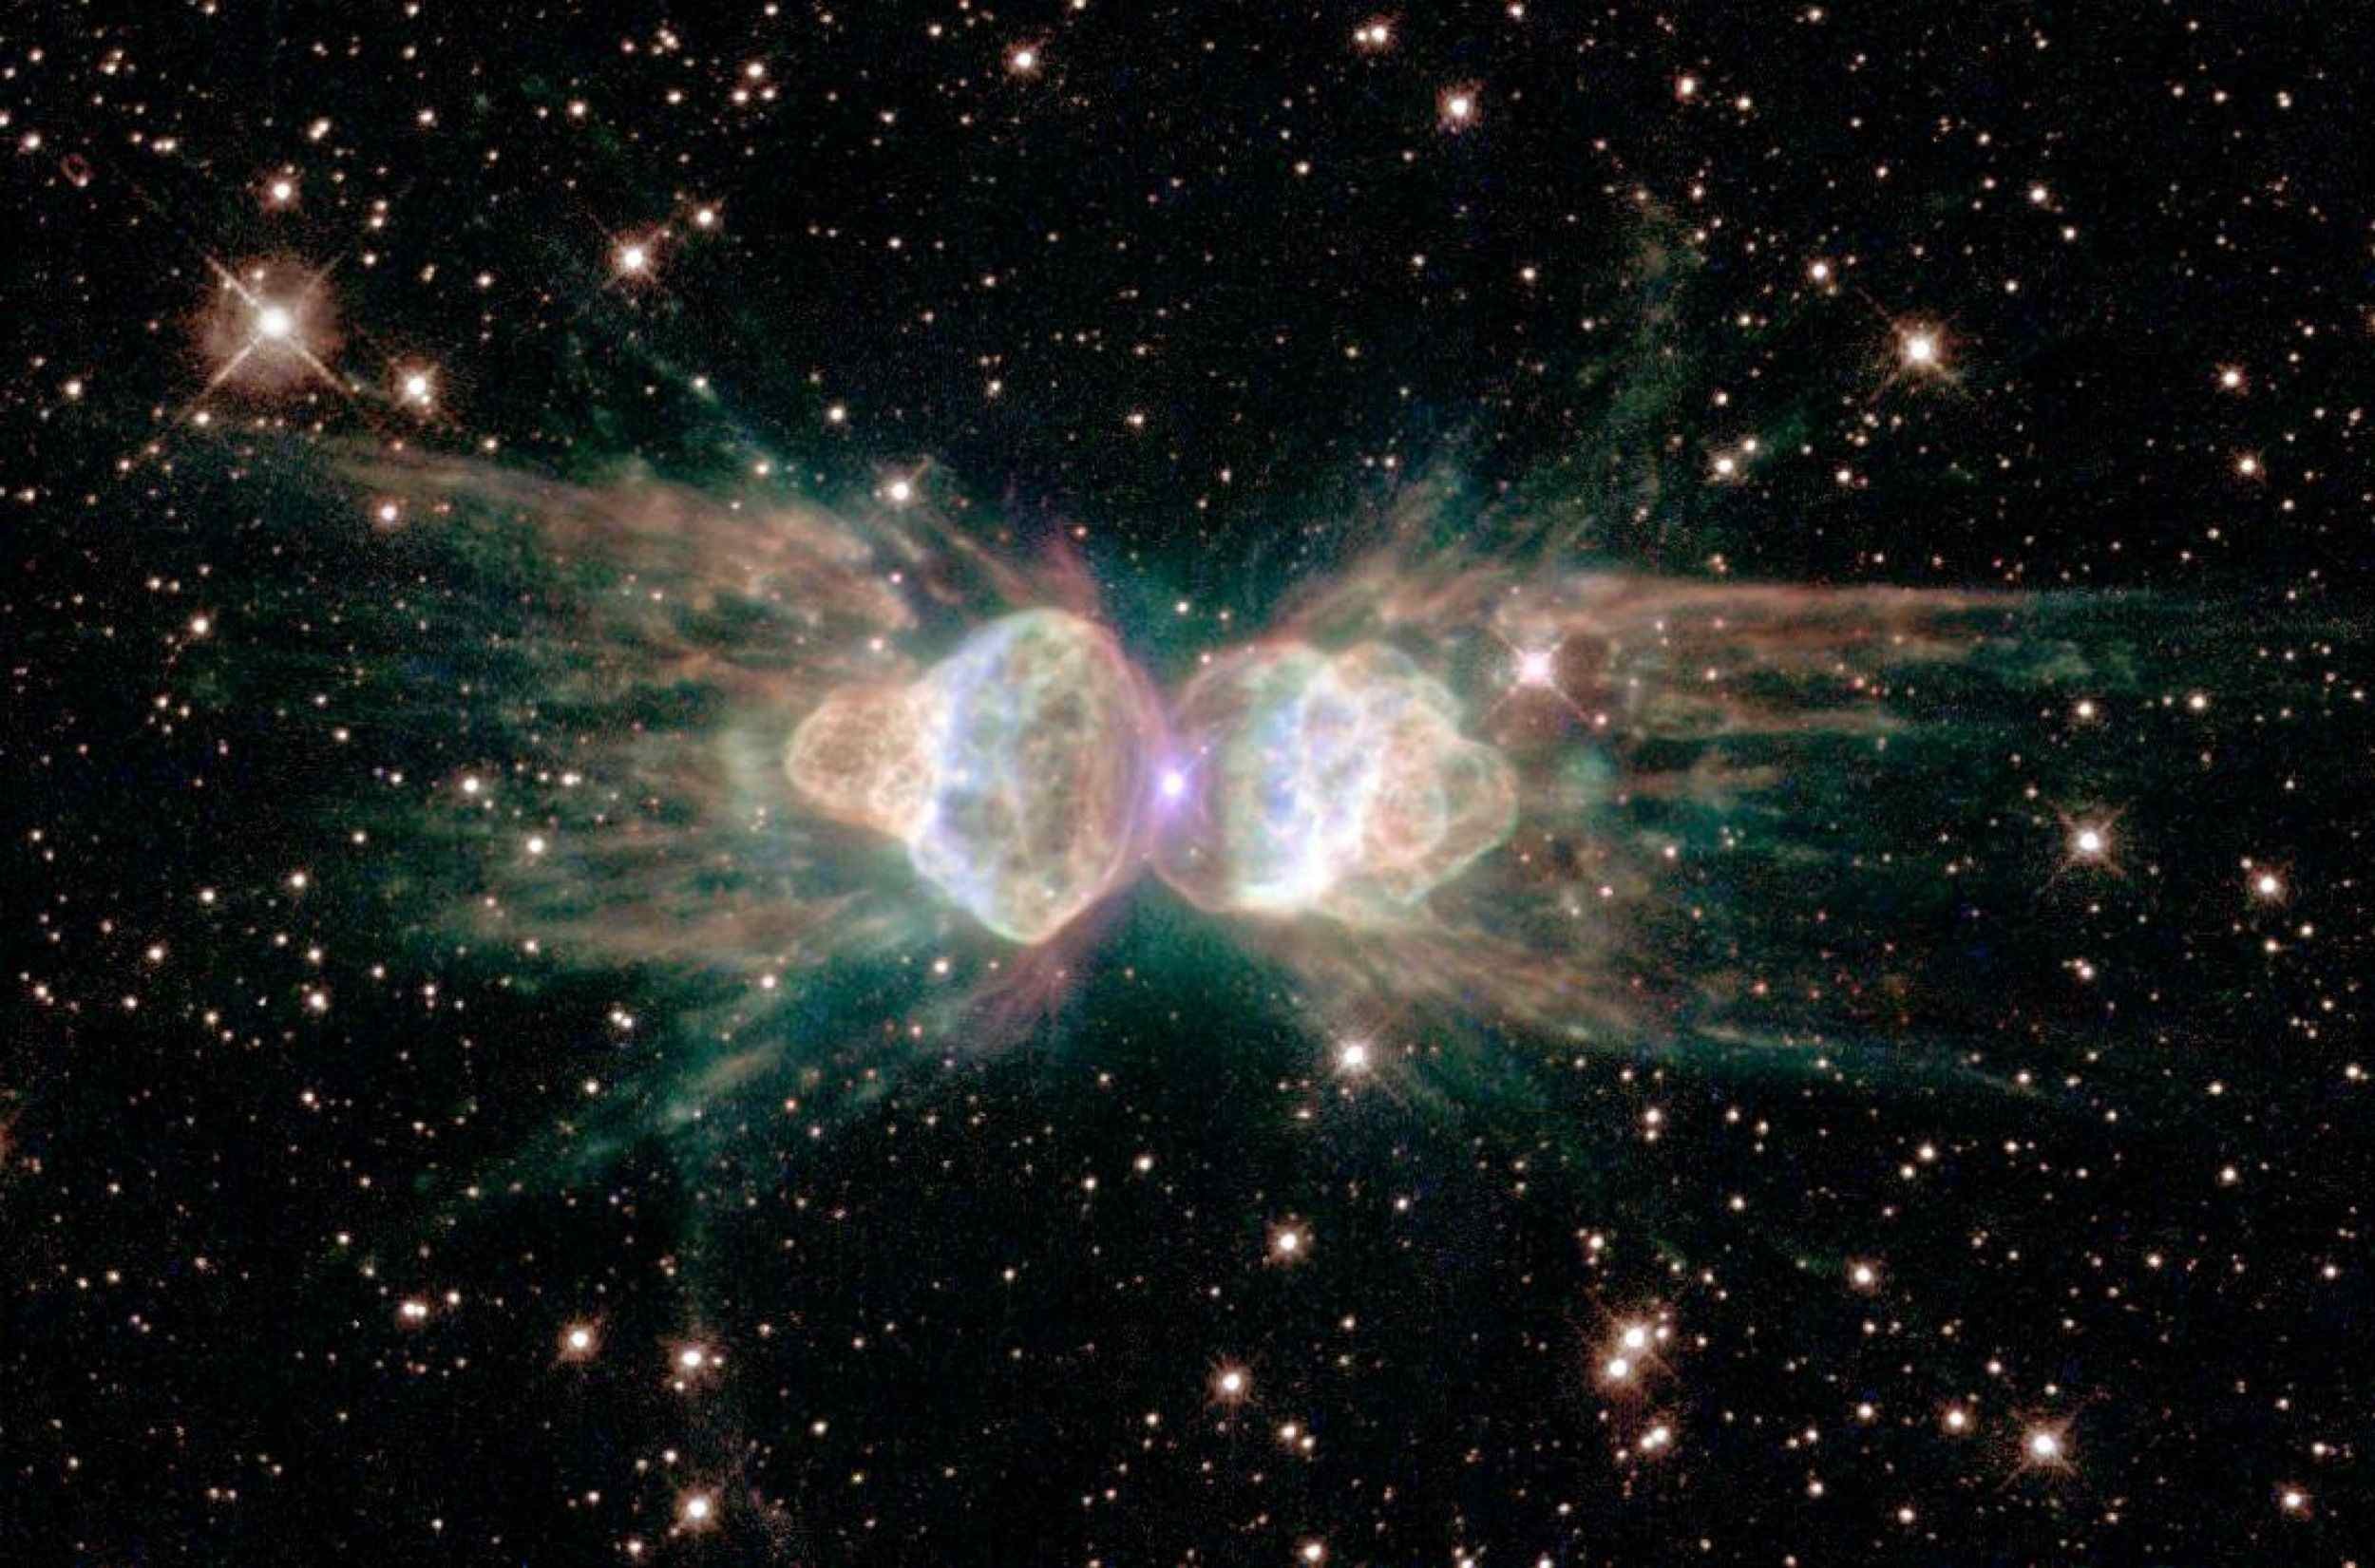 2500x1651 This image from NASA's Hubble Space Telescope is of a celestial object  called the Ant Nebula